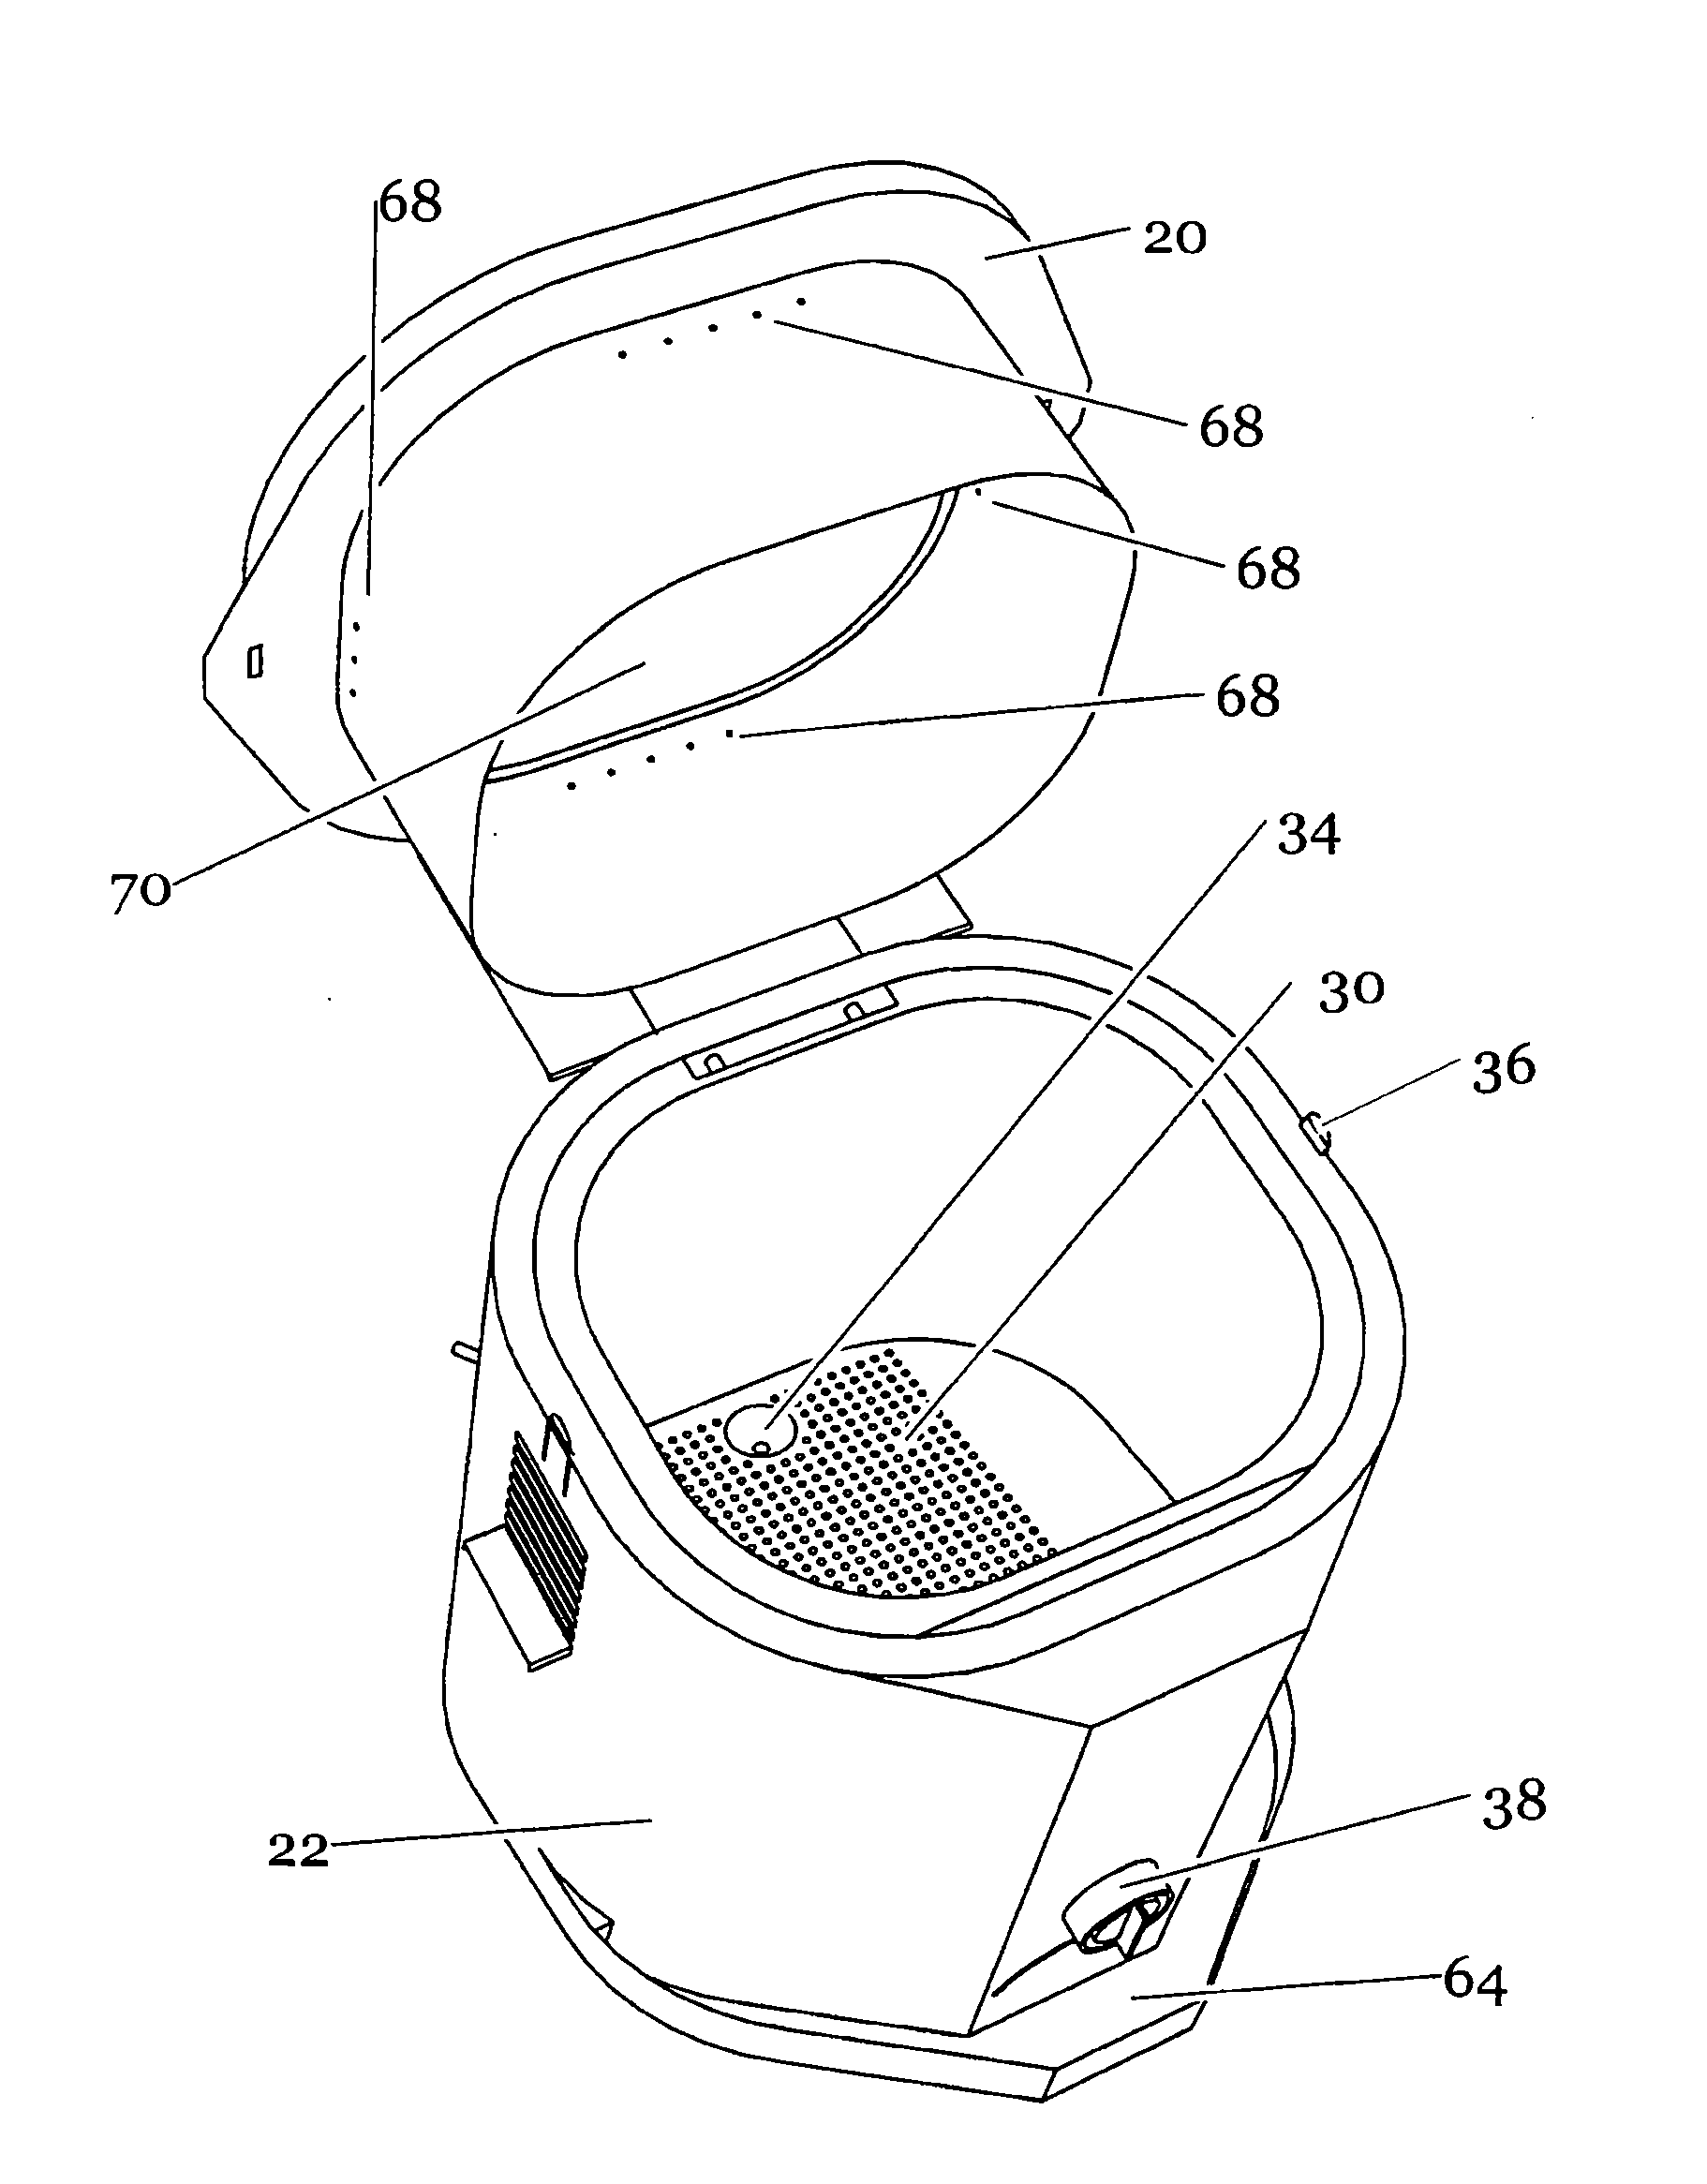 Device to efficiently cook food